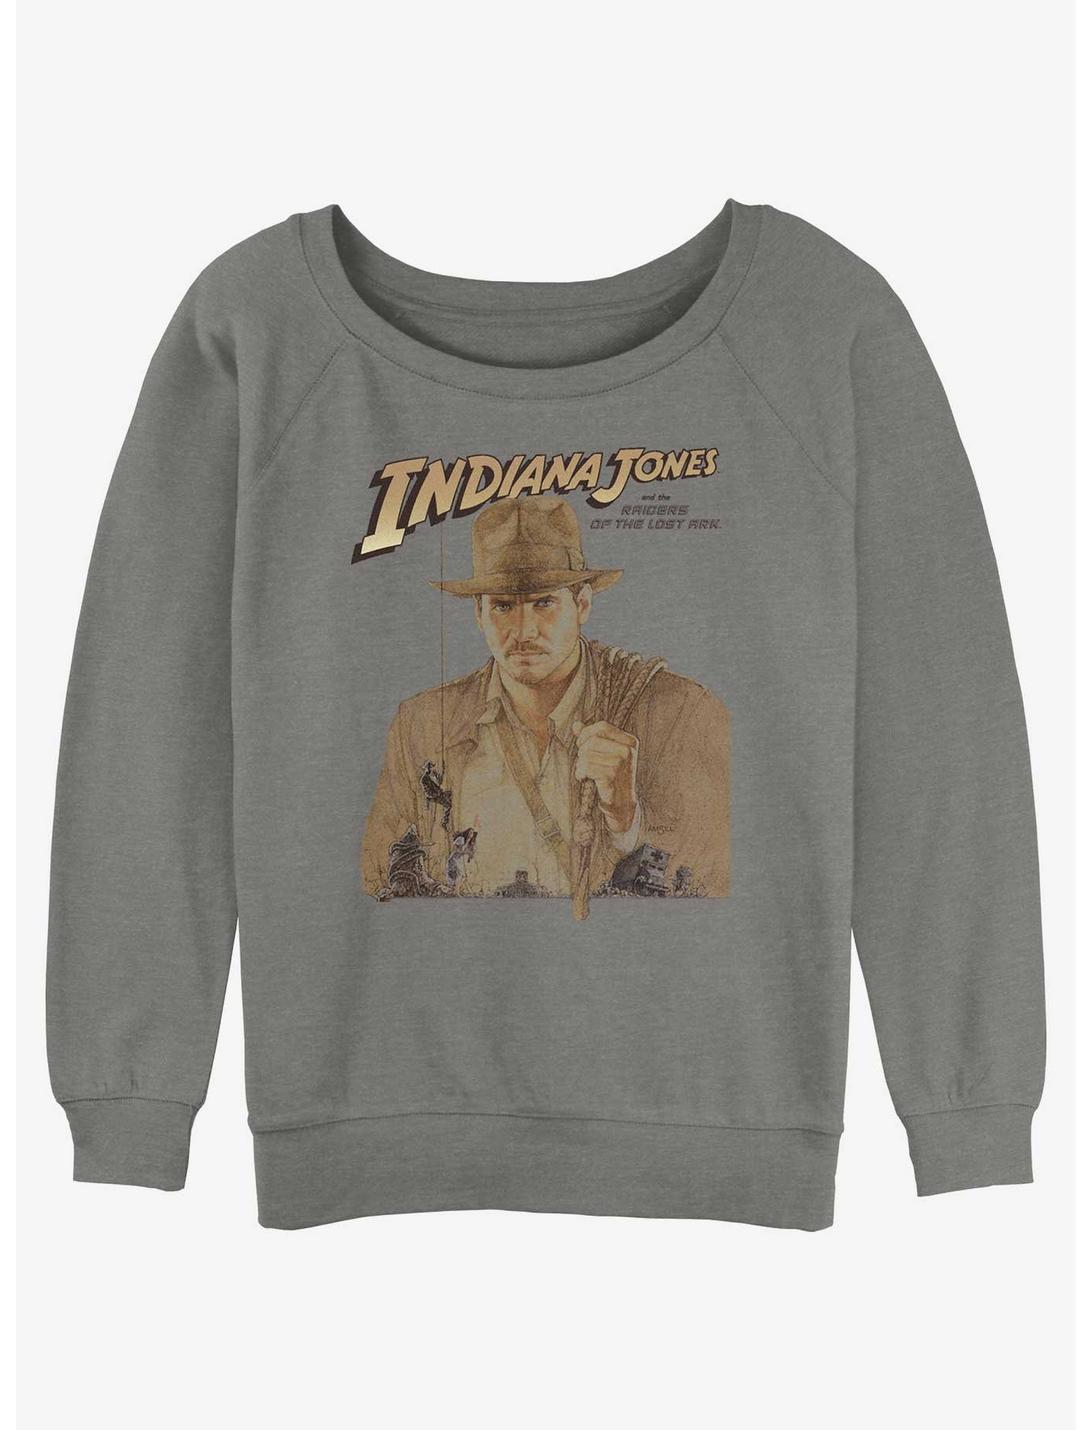 Indiana Jones and the Raiders of the Lost Ark Womens Slouchy Sweatshirt, GRAY HTR, hi-res